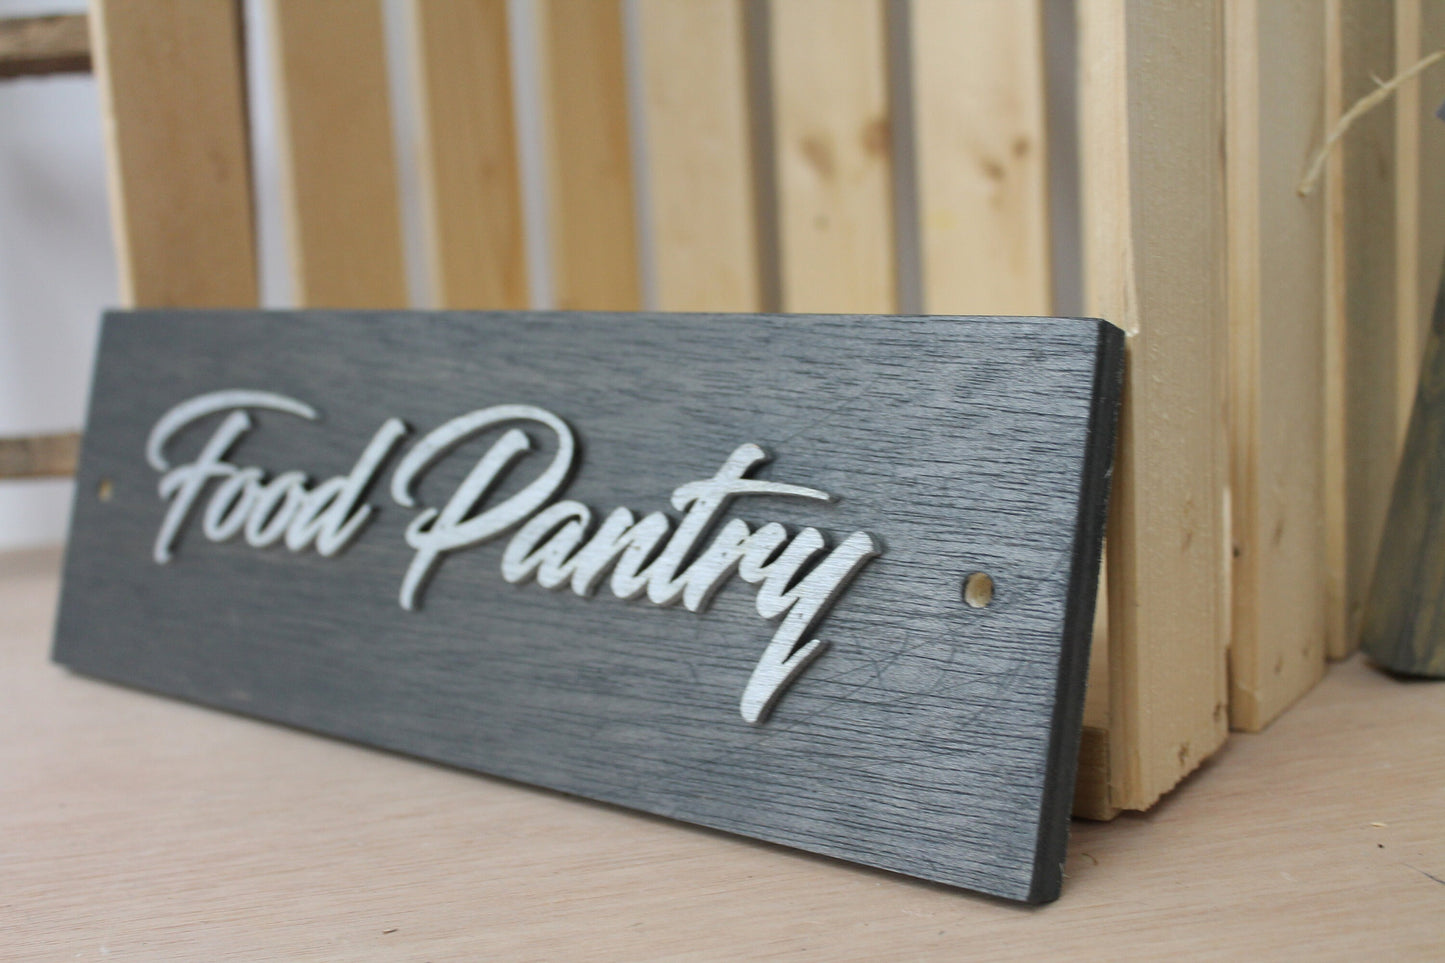 Door Sign Food Pantry Business Sign Unframed Name Plate Commerical Signage 3D Raised Church Wooden Sign Customizable Matching Direction